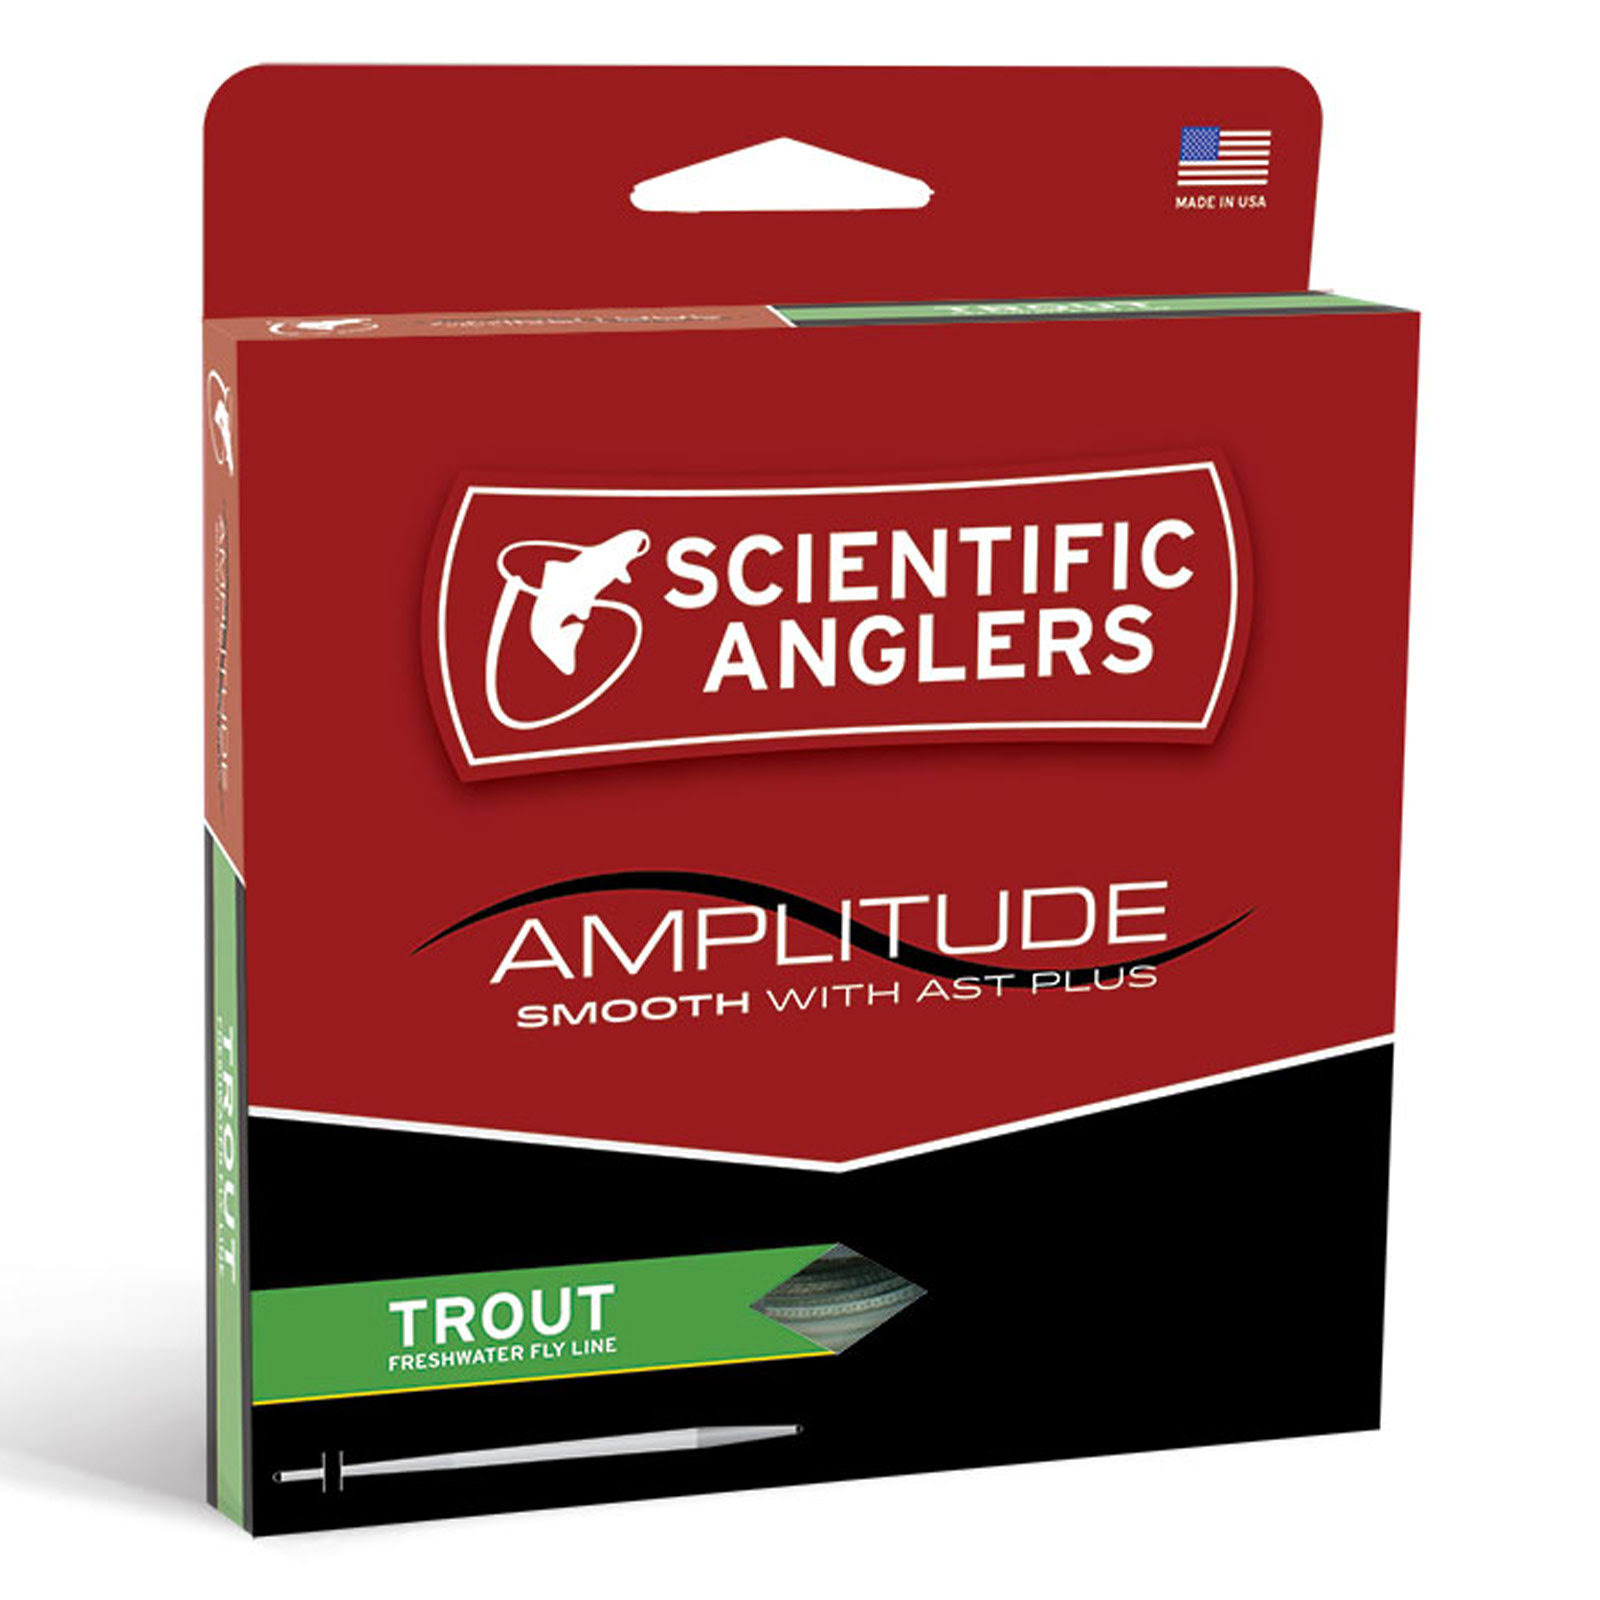 Scientific Anglers Amplitude Smooth Fly Line - Trout